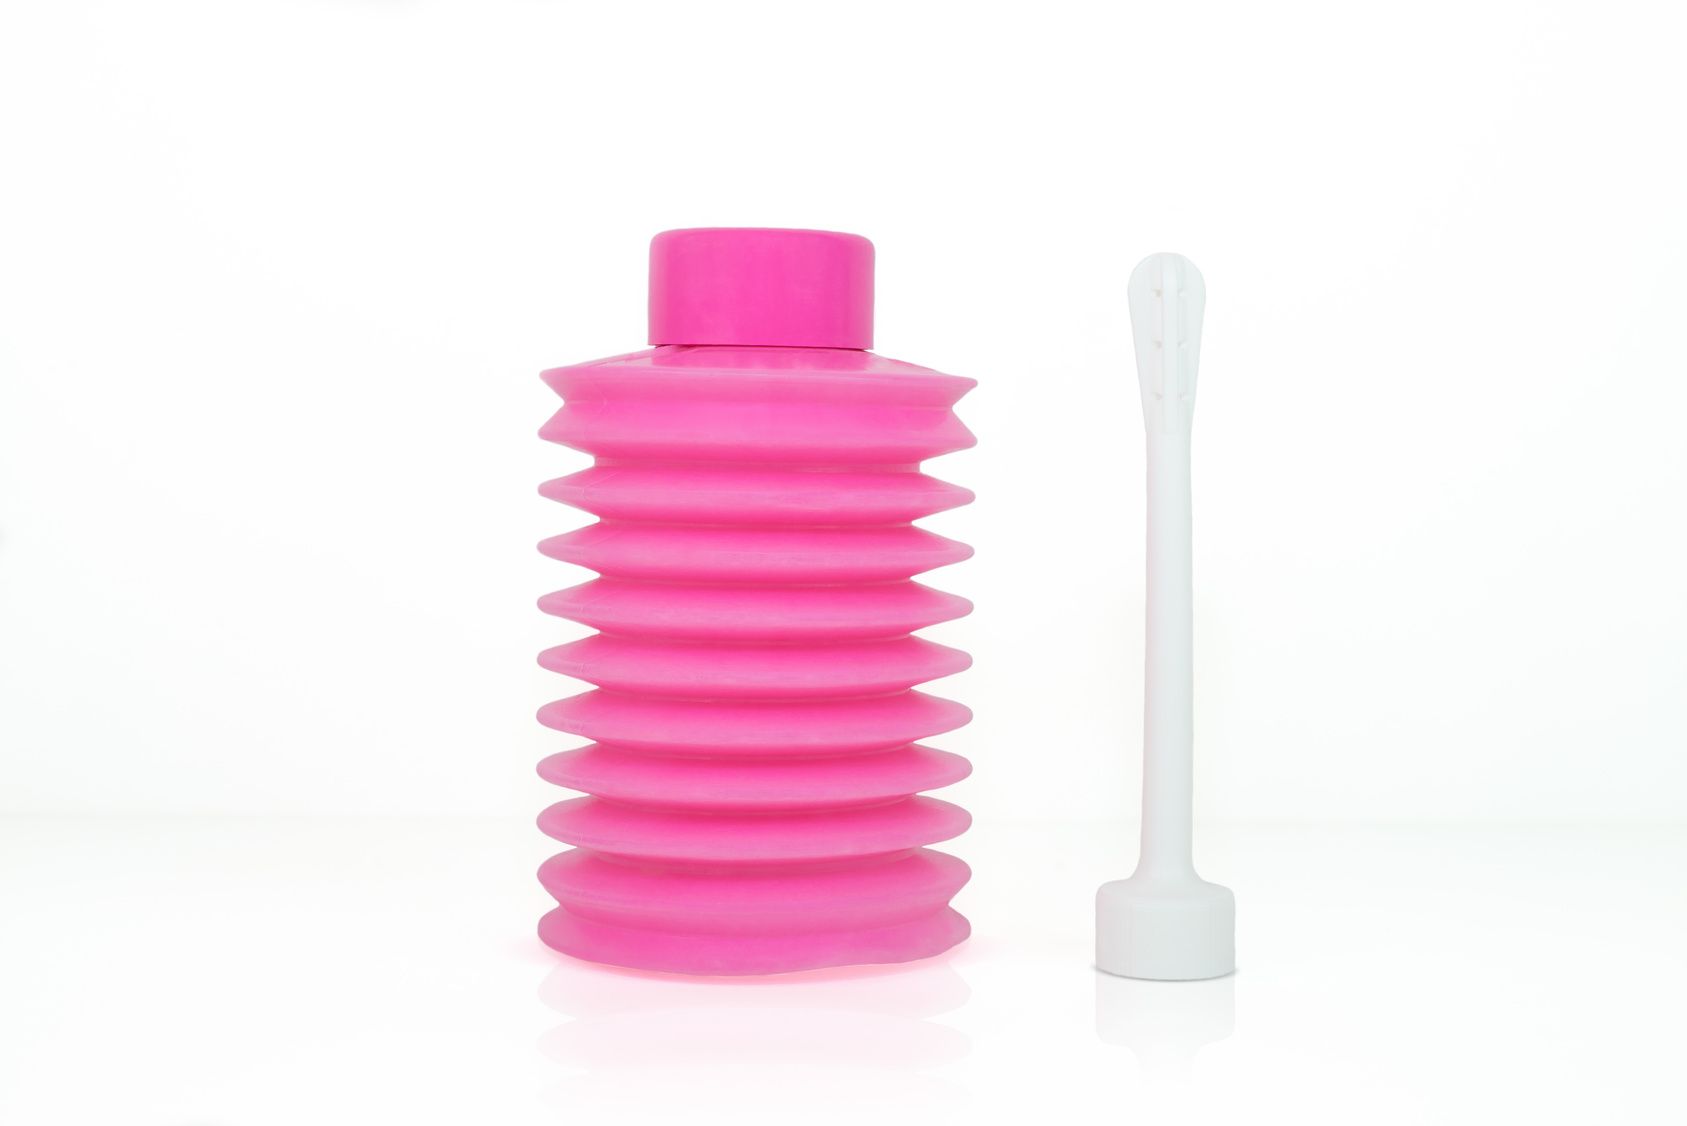 Vaginal Douche Objects Isolated The Alternative Daily